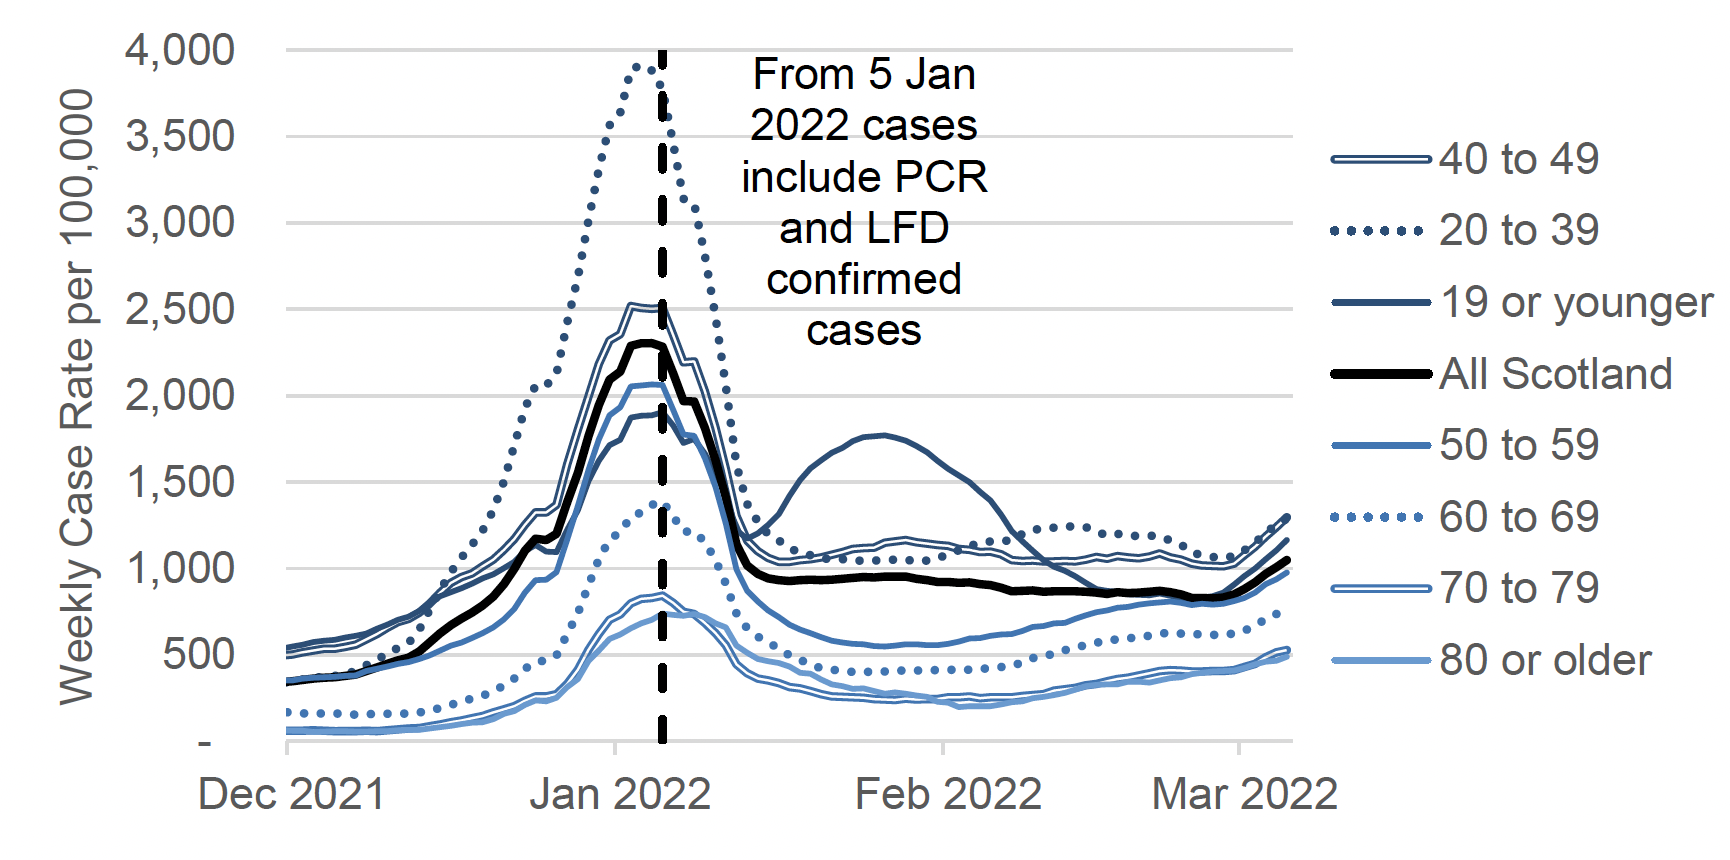 a line graph showing the weekly total combined PCR and LFD case rate (including reinfections) by specimen date per 100,000 people by age group, from December 2021 to March 2022. All age groups saw a peak in weekly case rates in early January 2022, and in early March there is an increase visible in all age groups. The chart has a note that says: “from 5 January 2022 cases include PCR and LFD confirmed cases”. Before 5 January 2022, the case rate includes only PCR confirmed cases.